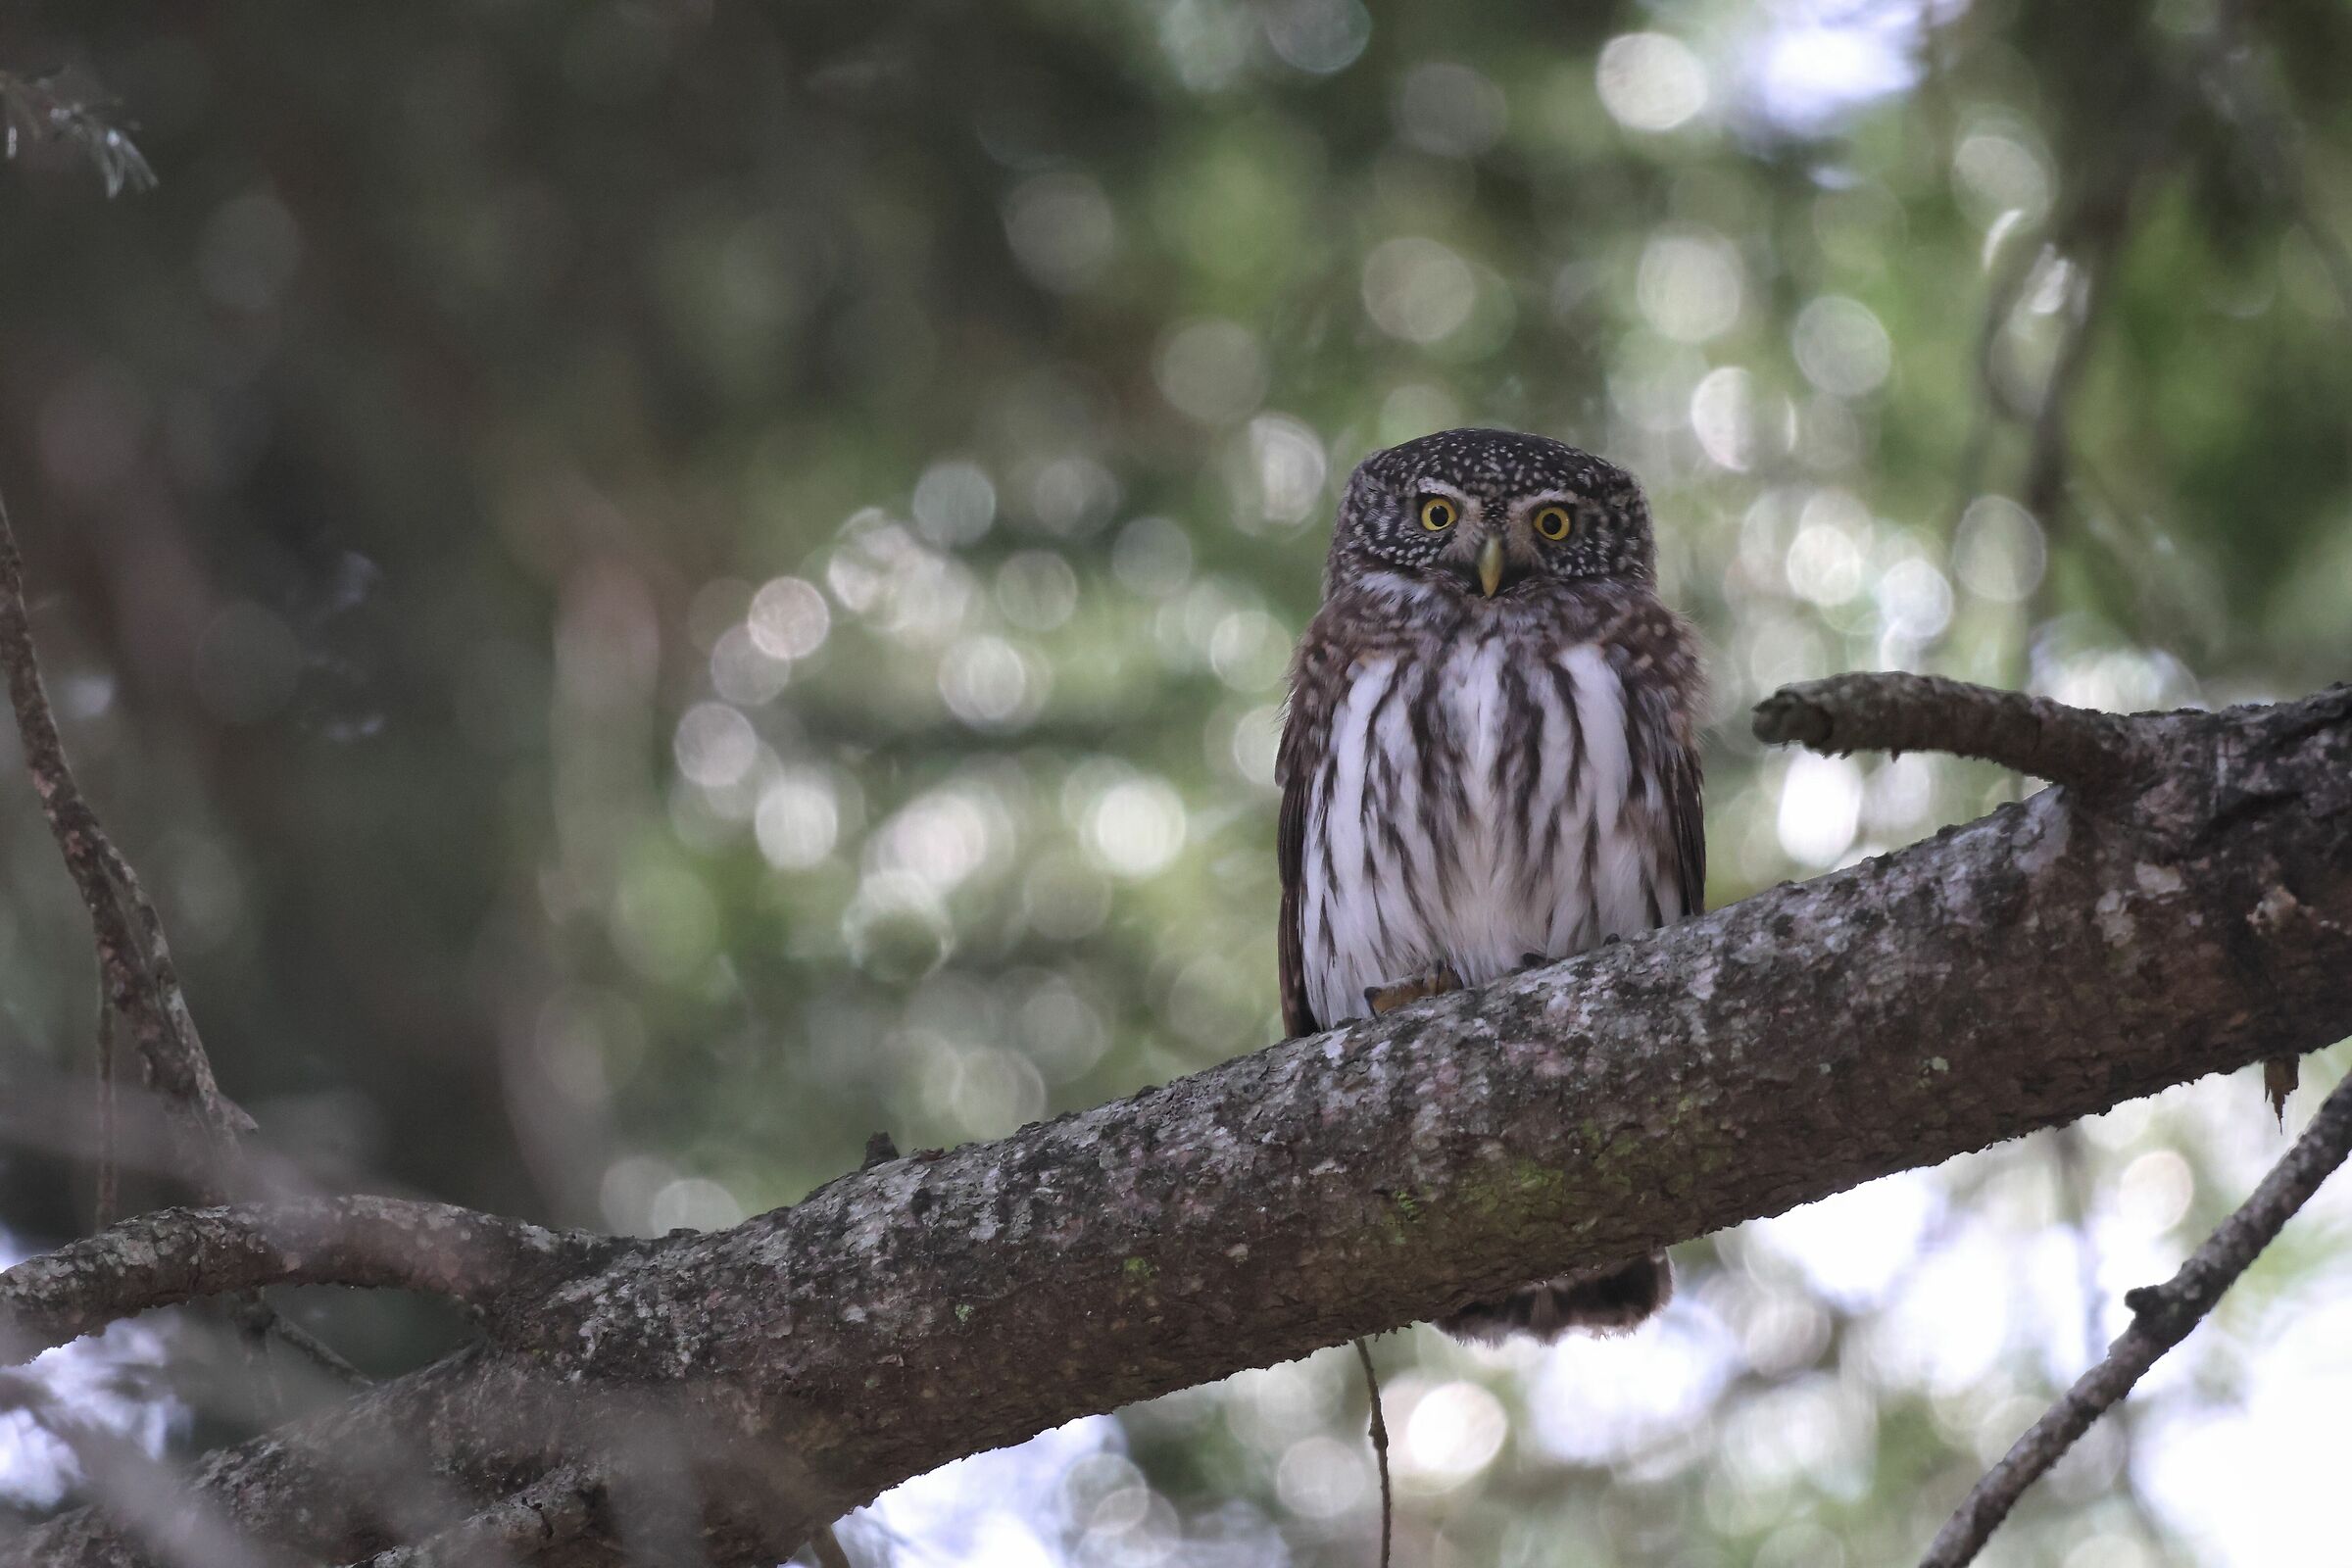 The sentinel of the woods... The Dwarf Owl ...